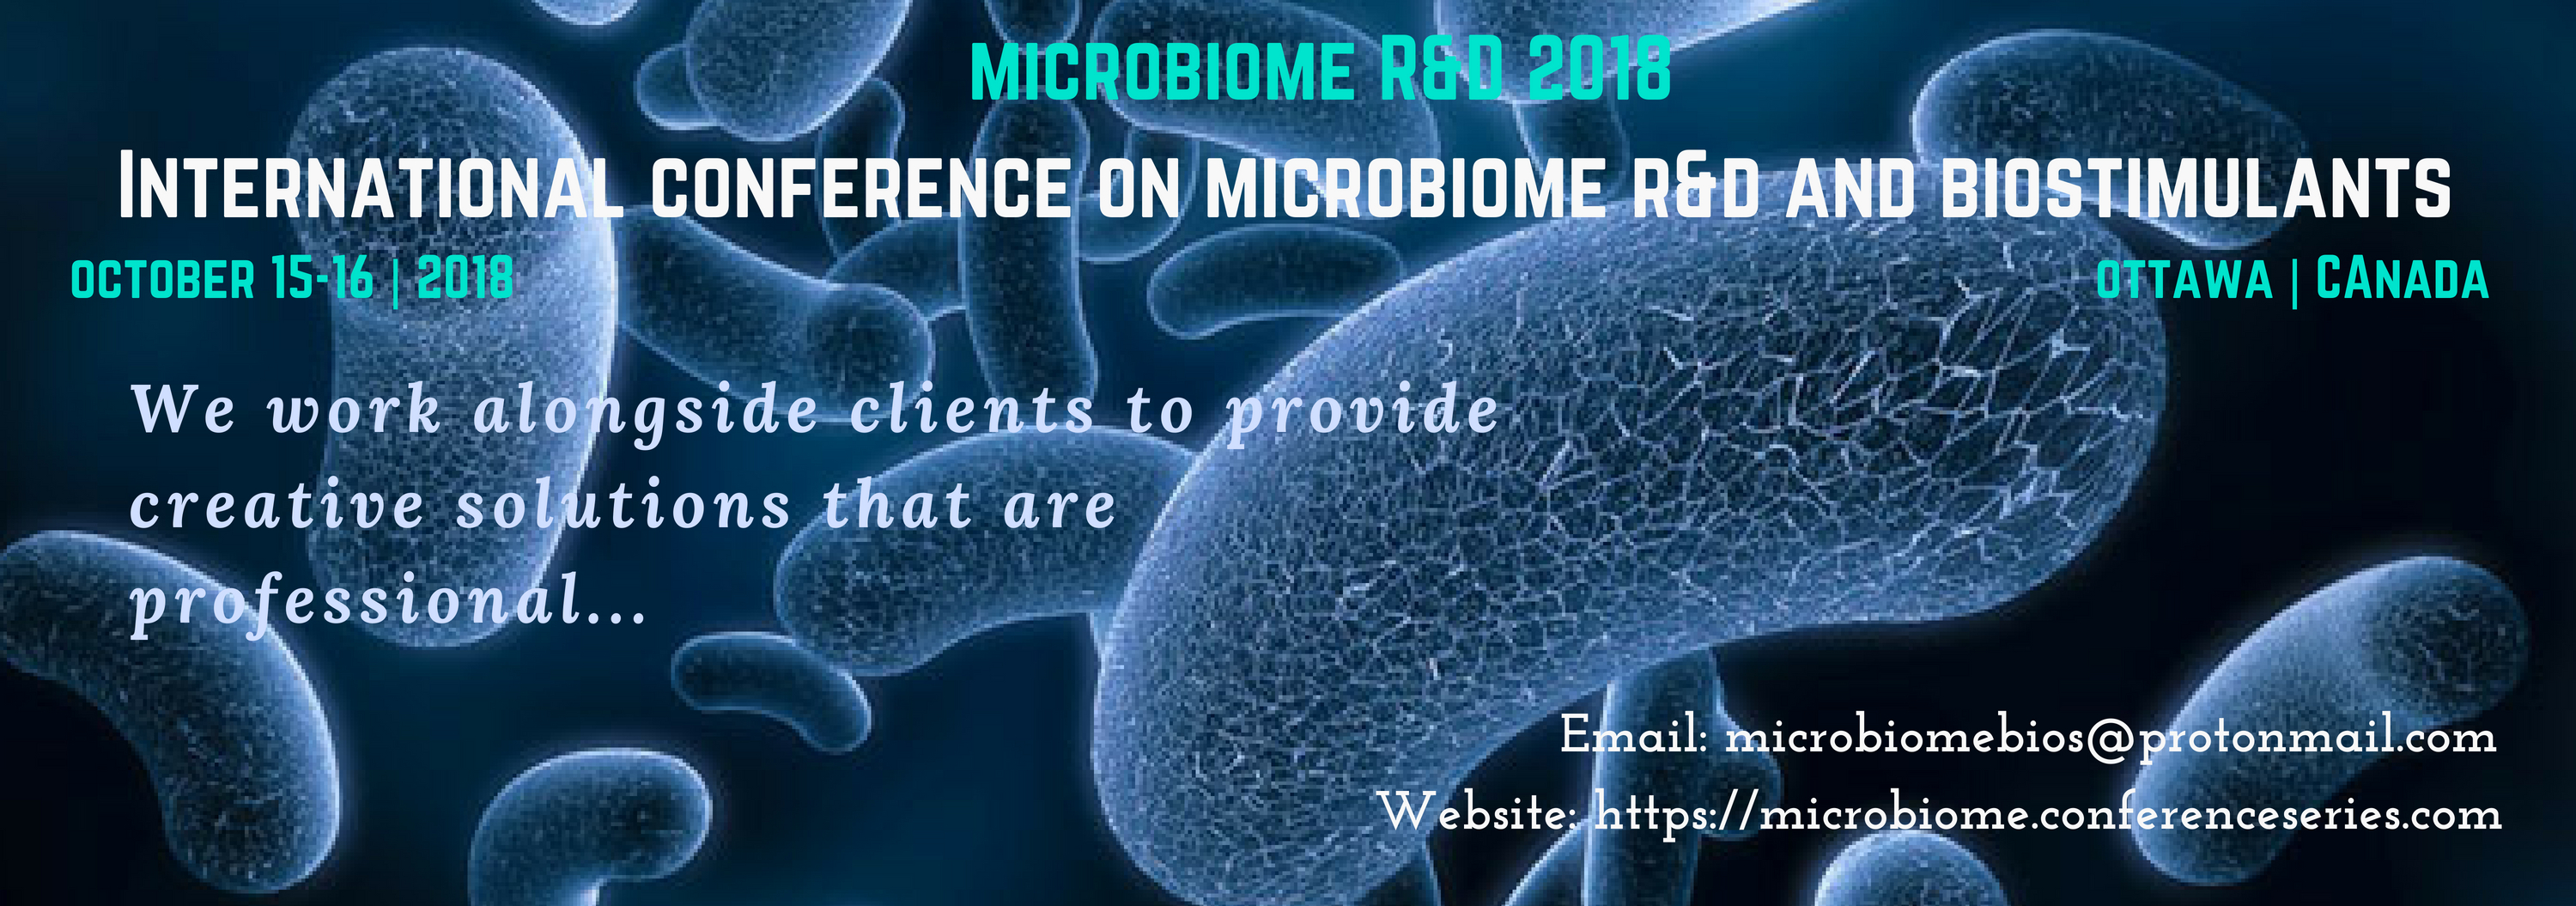 International conference on Microbiome R&D and Biostimulants